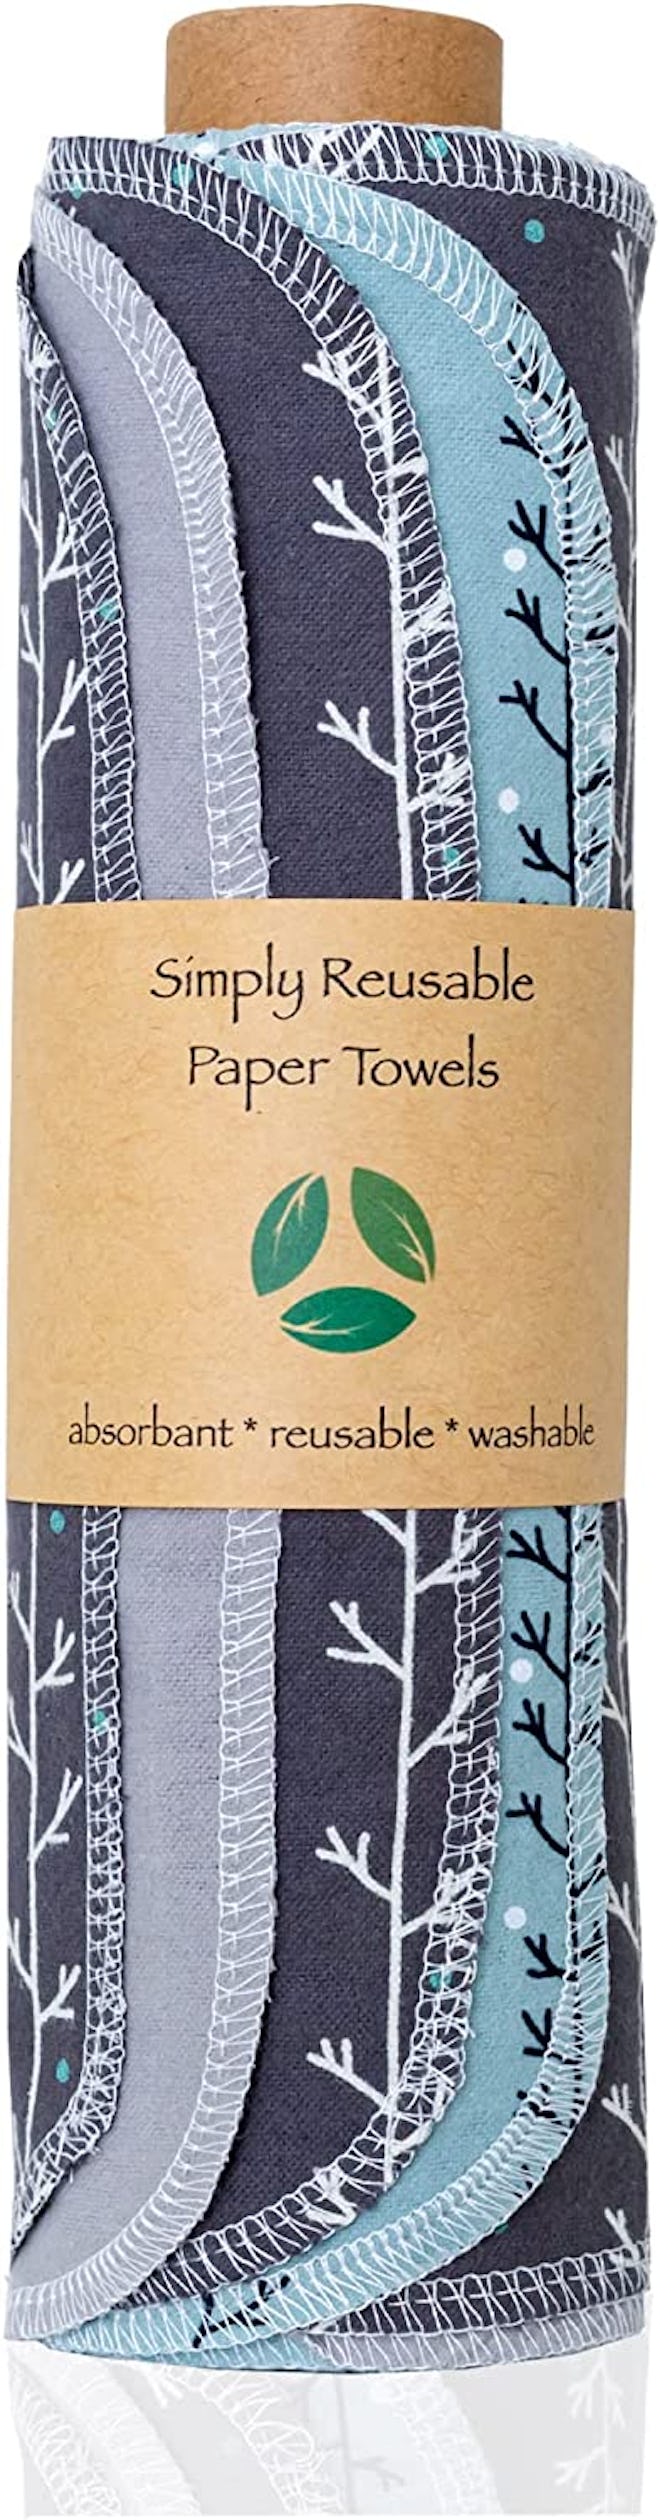 Simply Reusable Paper Towels (15-Pack)